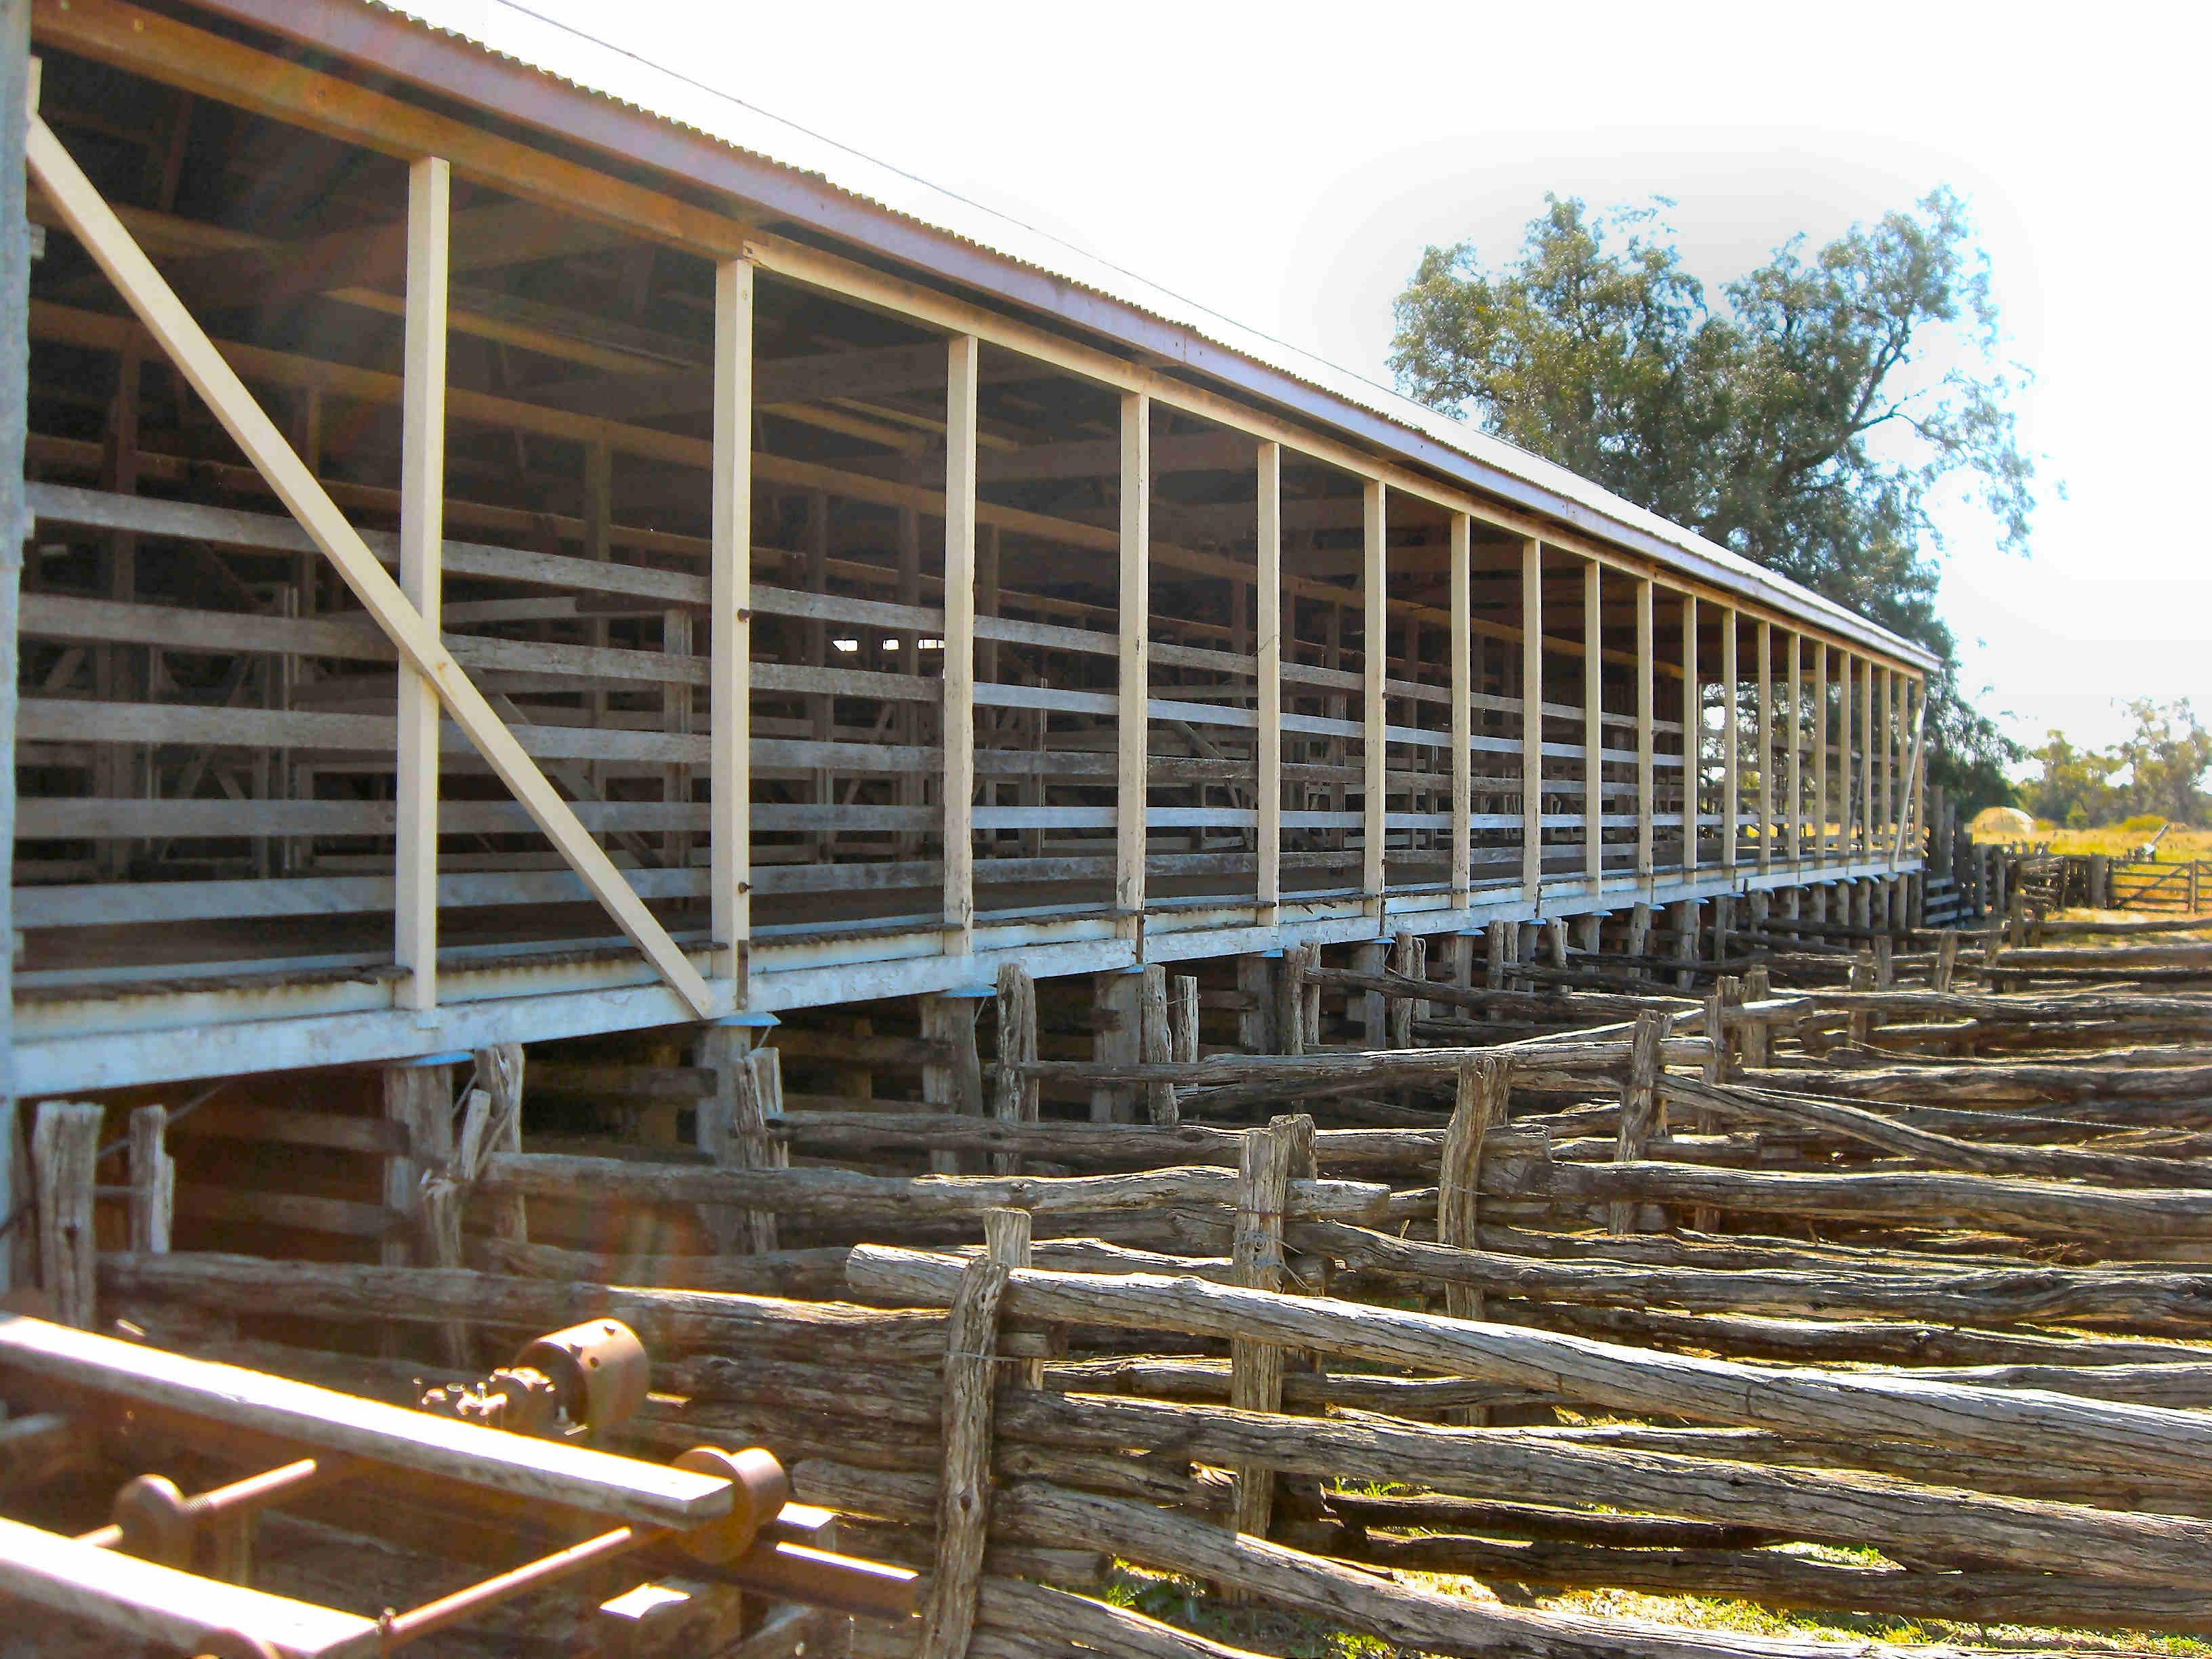 Sheep pens - at the Blackall wool scour